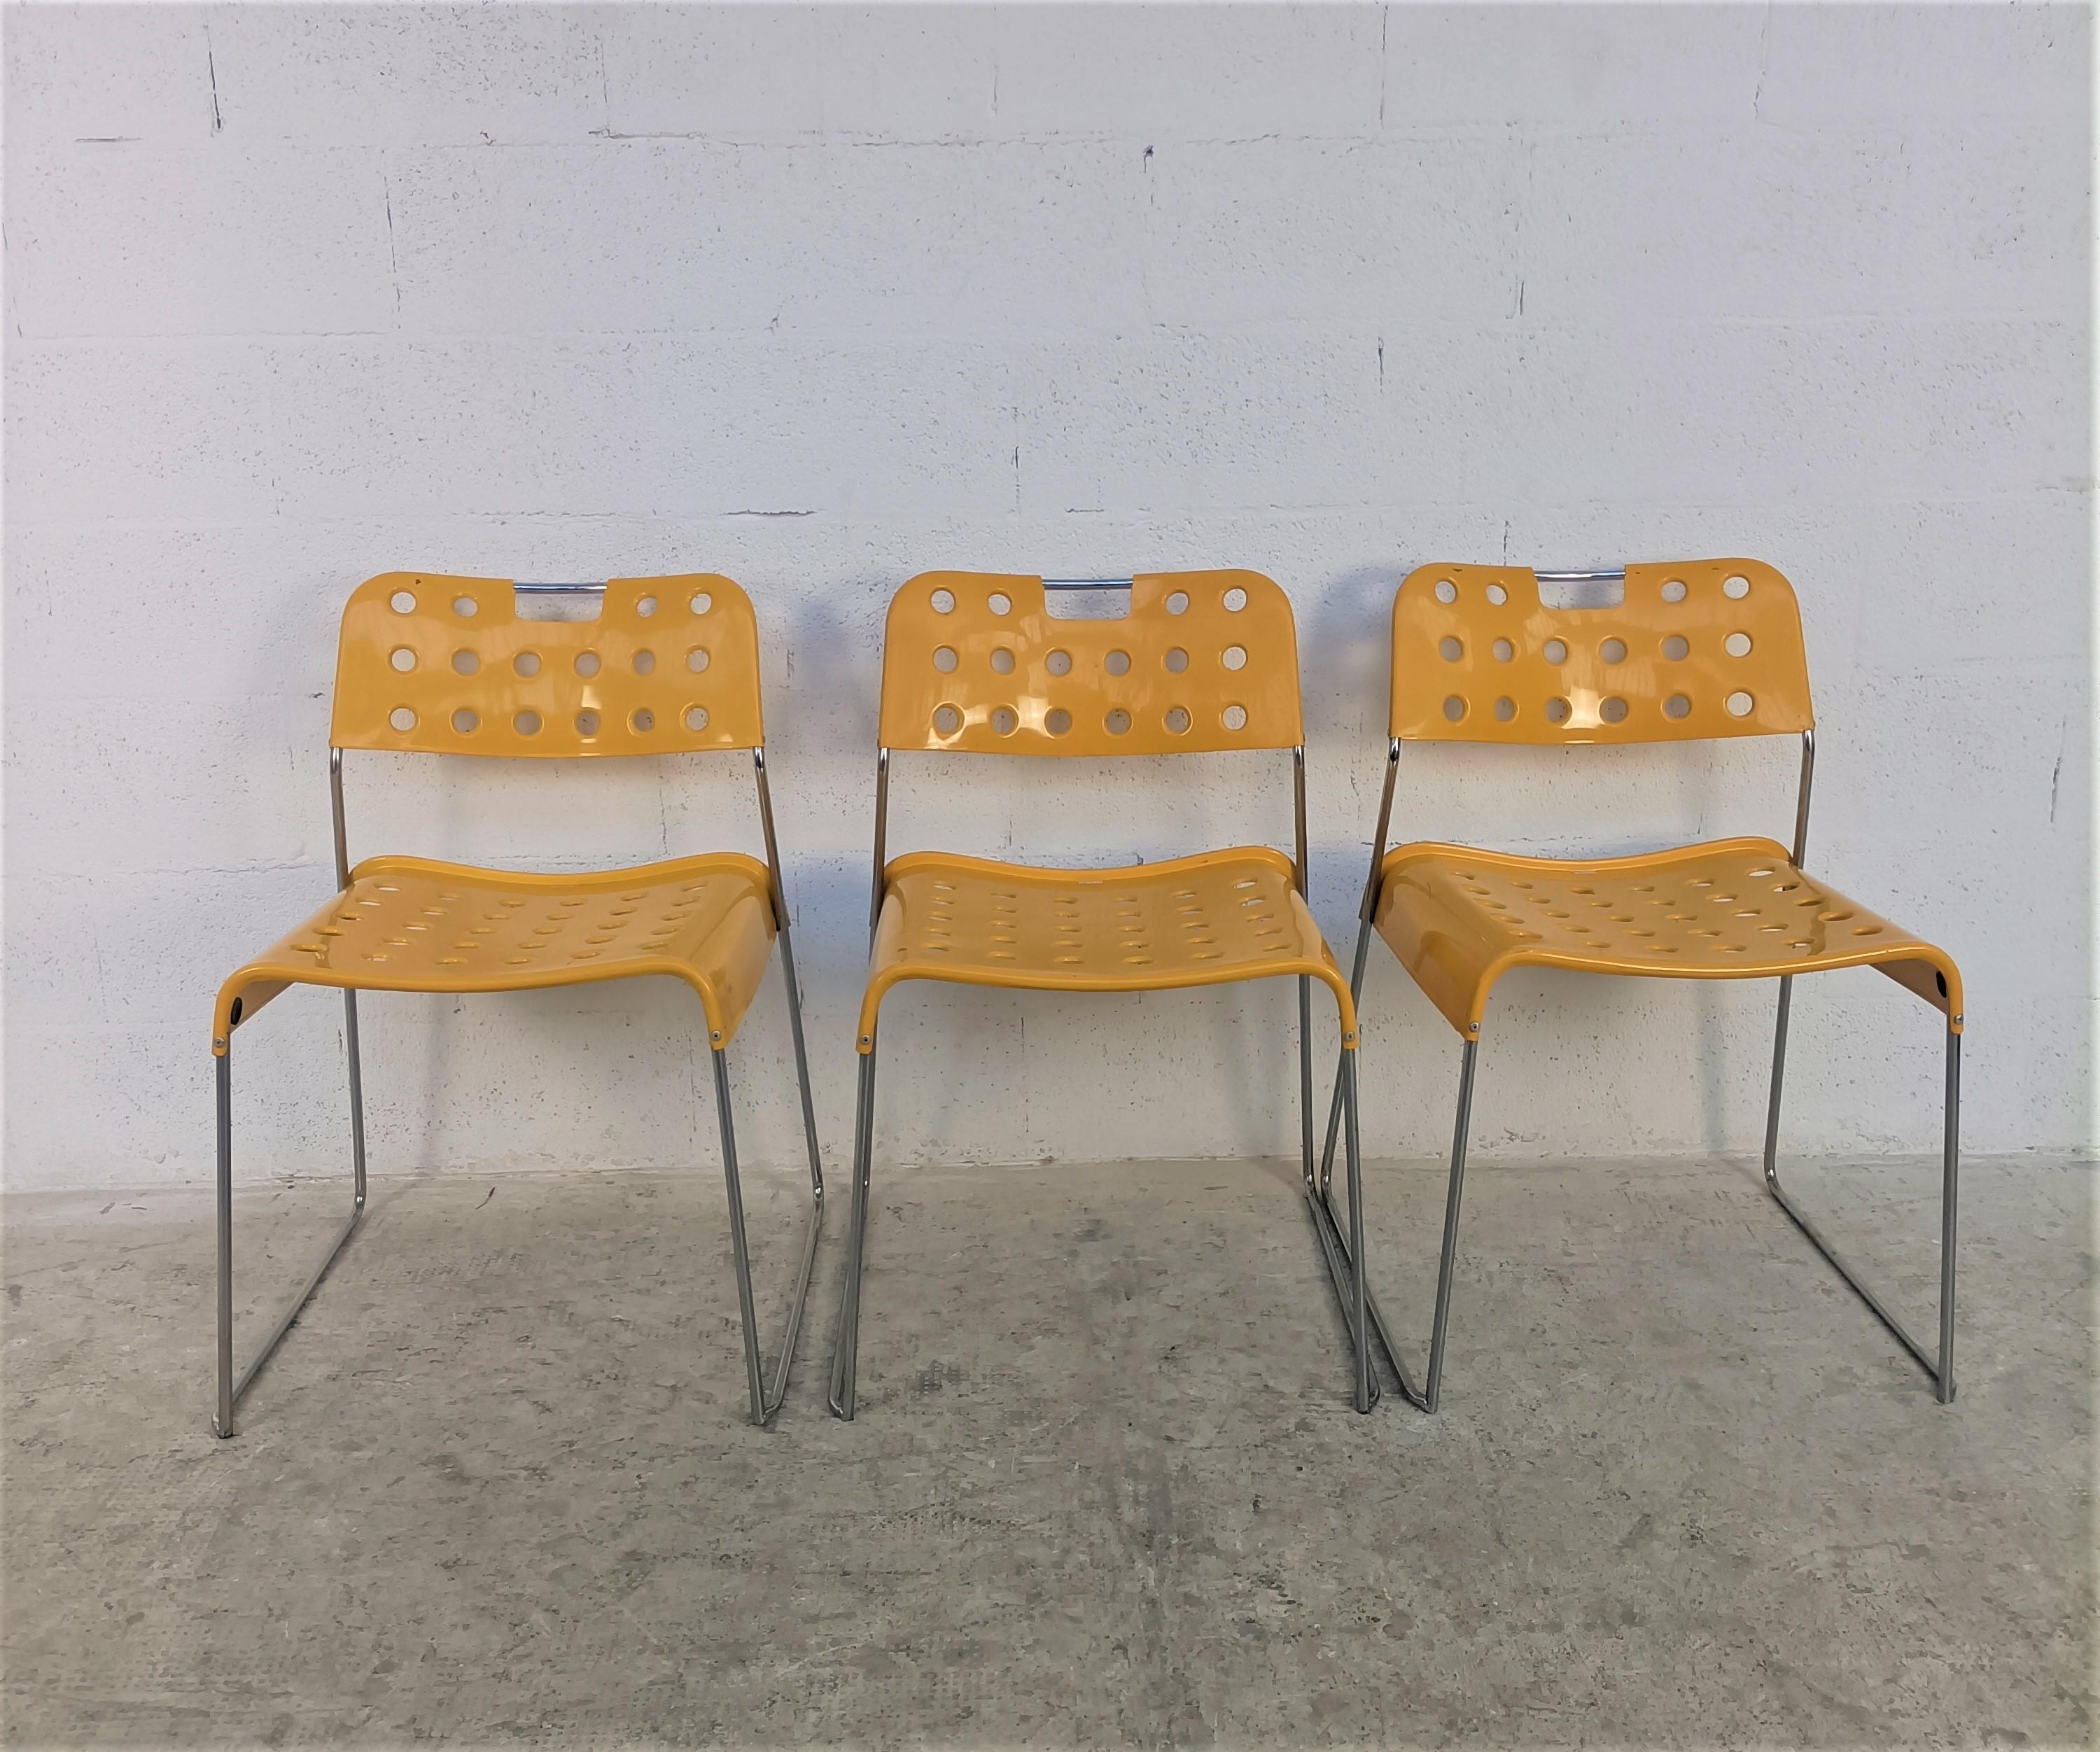 Mid-Century Modern 3 Yellow Omkstak Stackable Chairs by Rodney Kinsman for Bieffeplast 70s